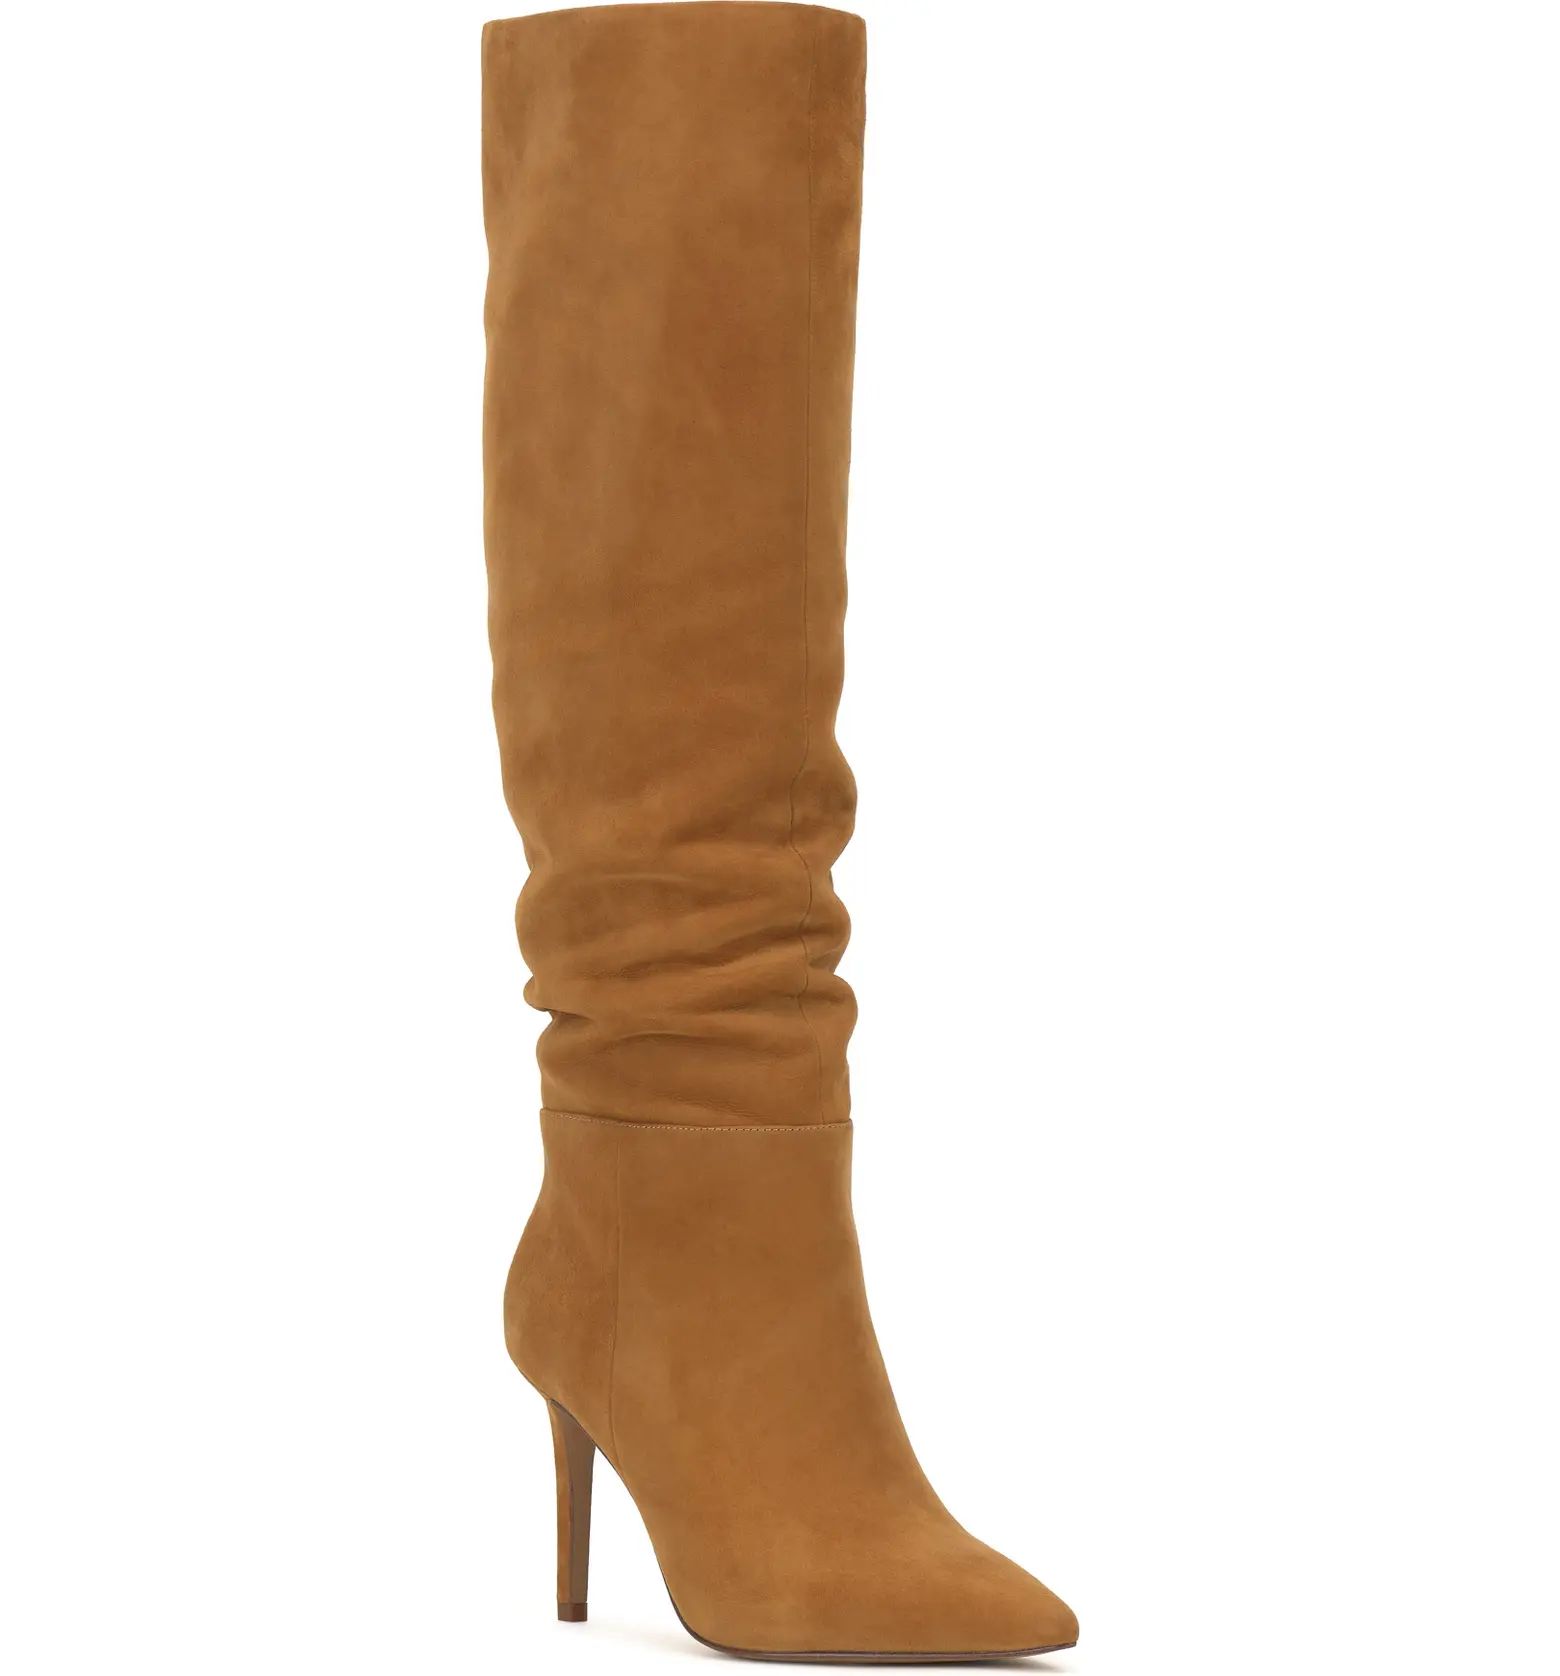 Vince Camuto Kashleigh Pointed Toe Knee High Boot (Women) | Nordstrom | Nordstrom